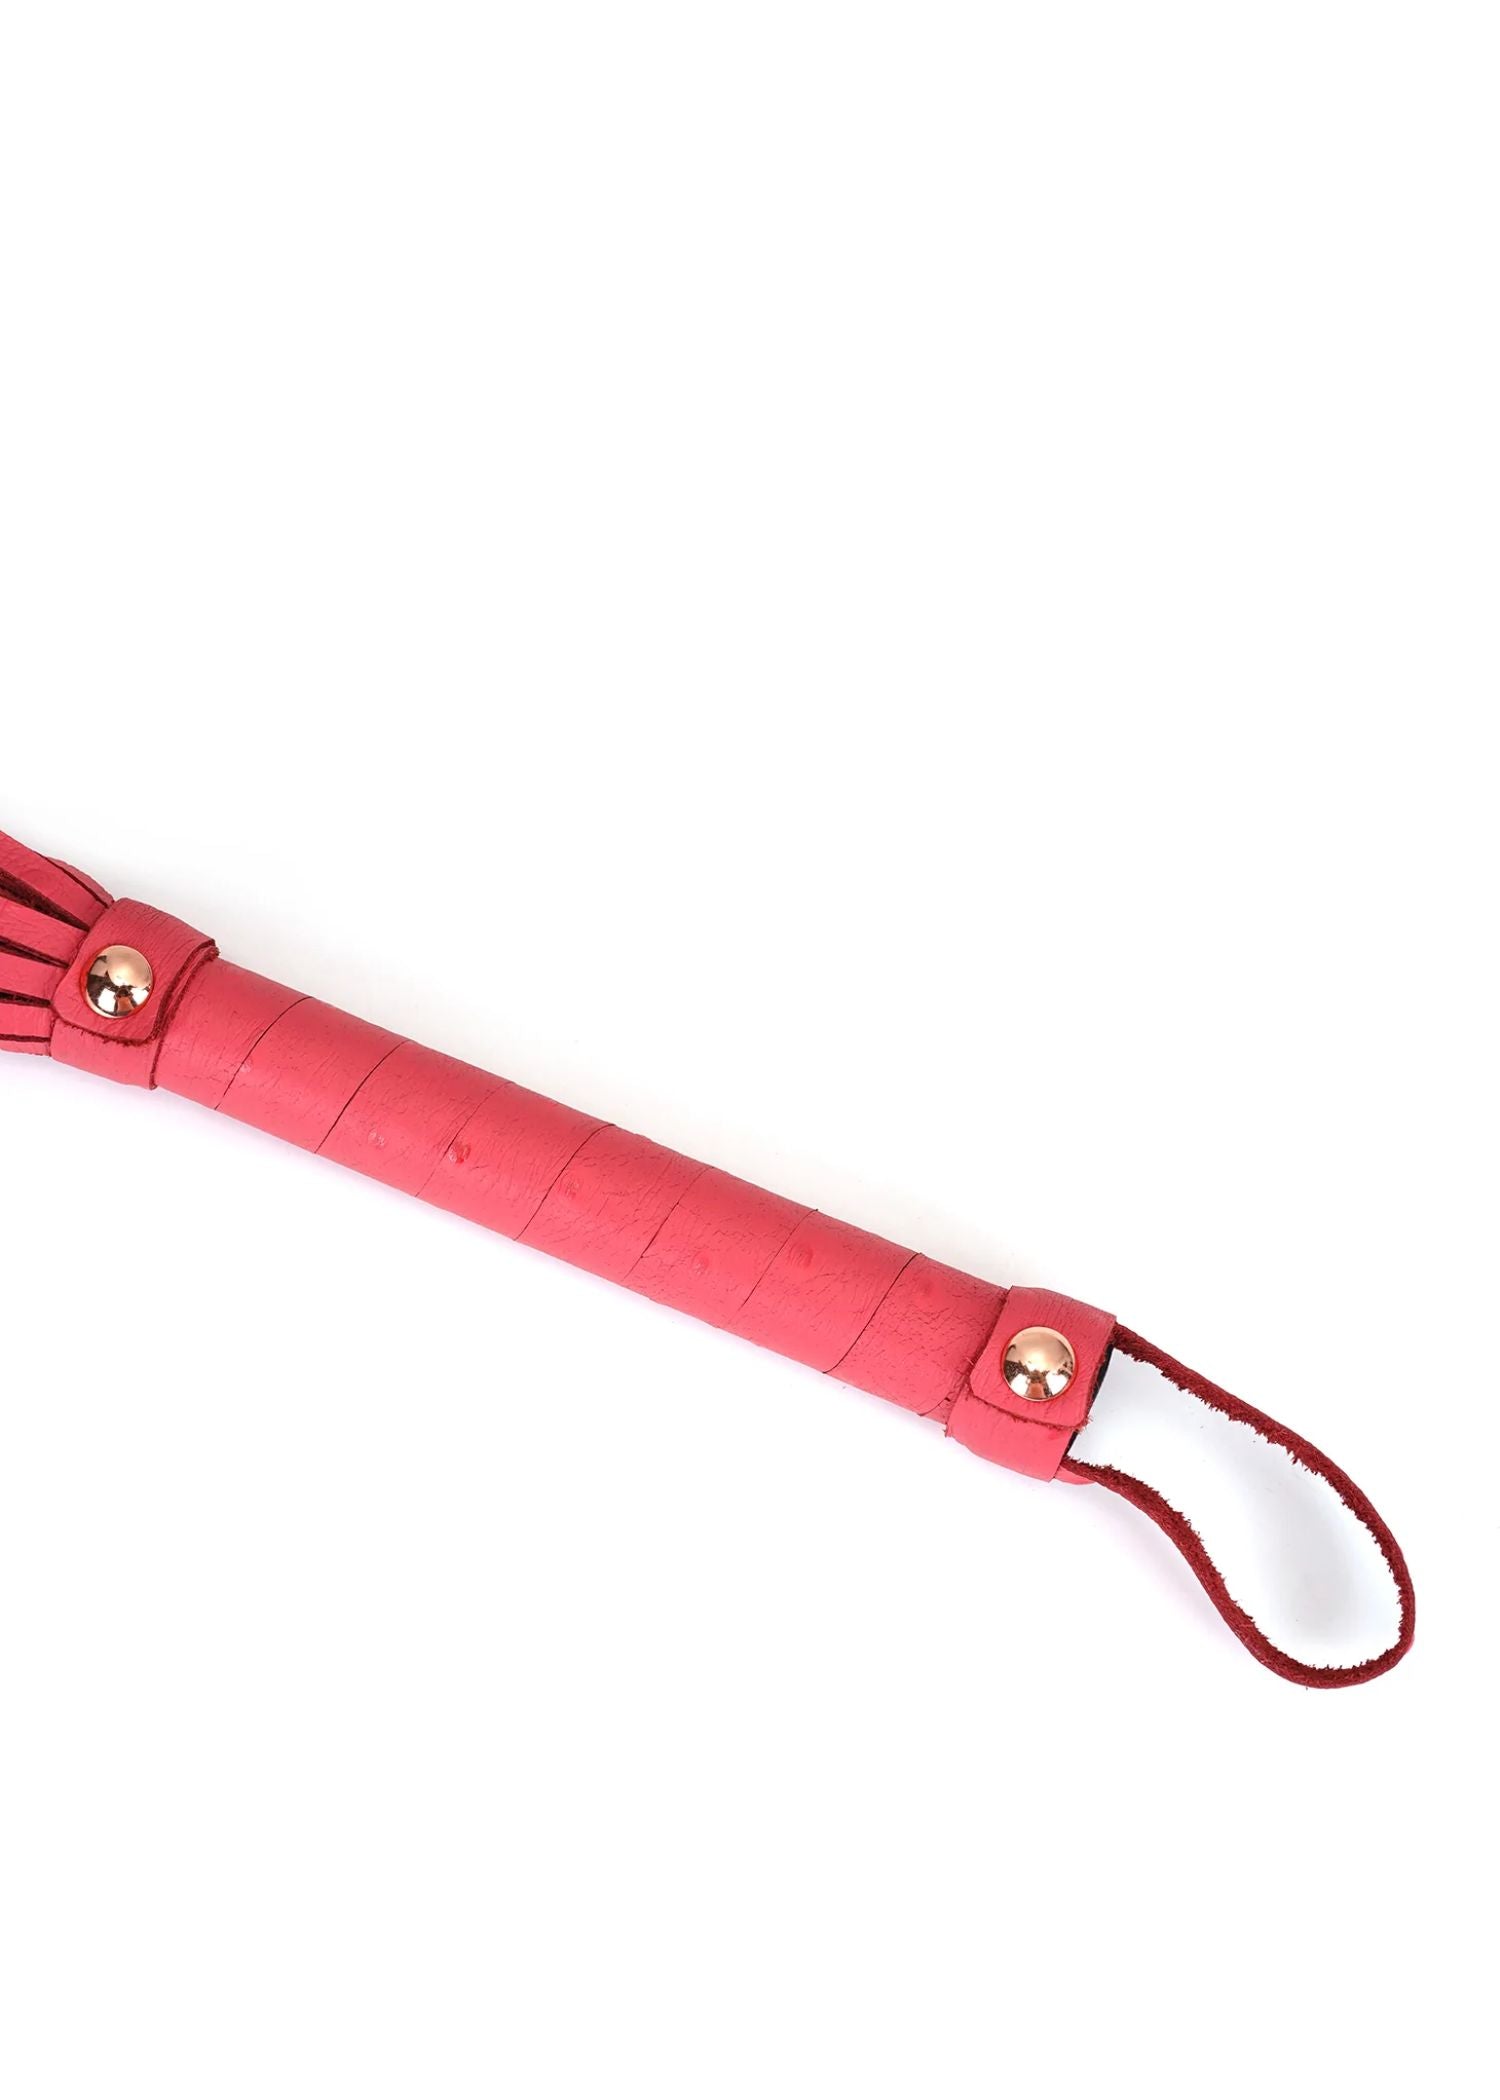 Liebe Seele Angel's Kiss Pink Leather Flogger - BDSM Toy | Avec Amour Lingerie